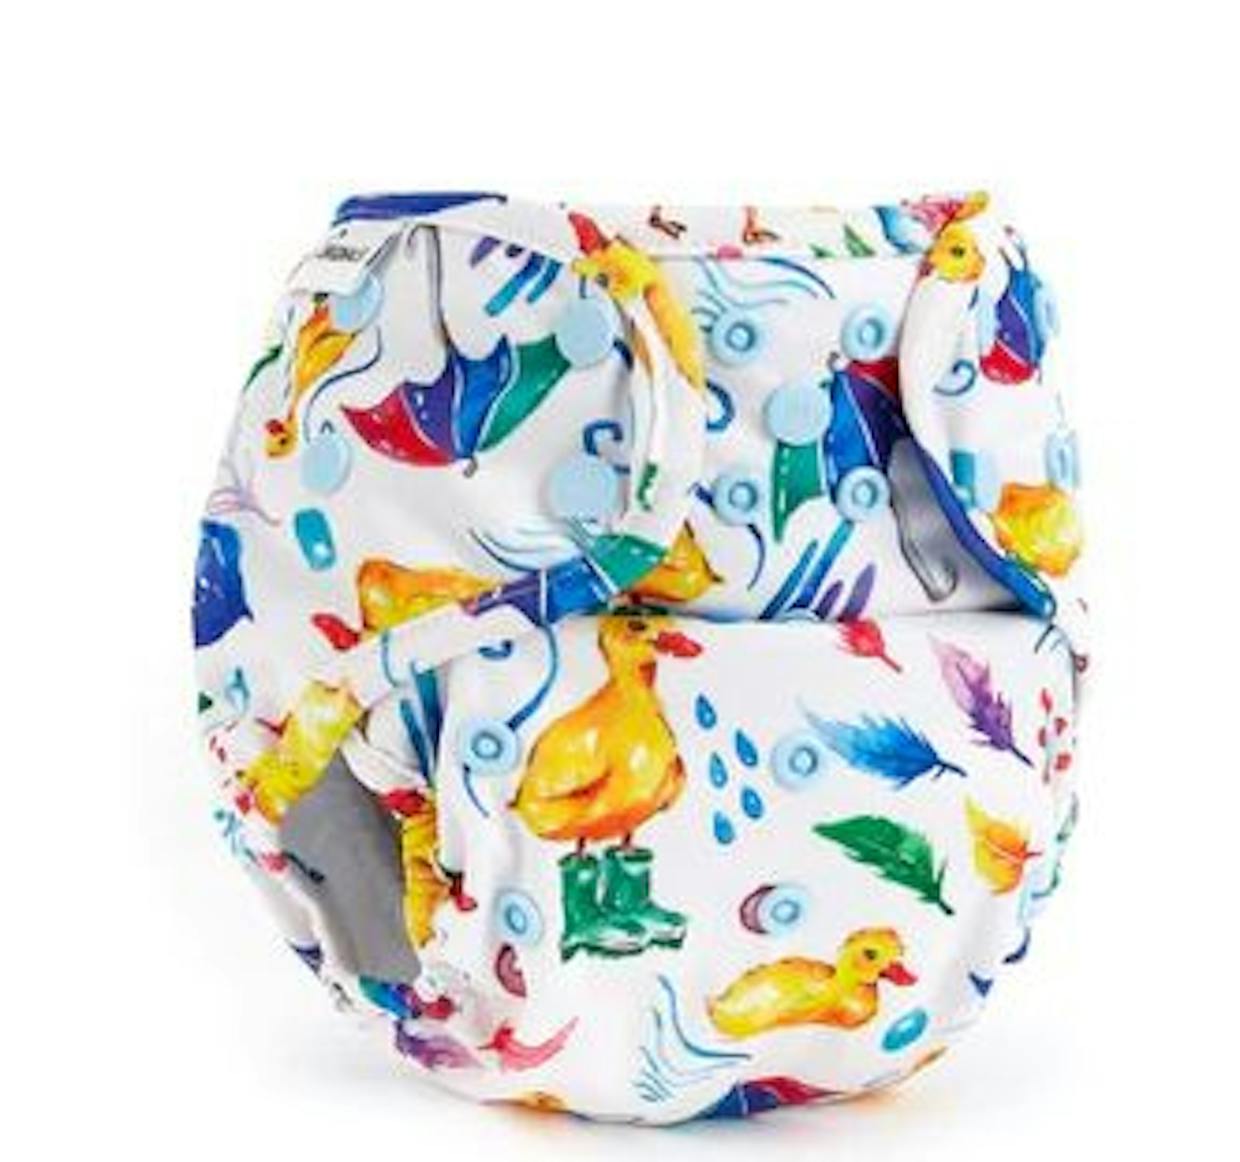 Health advantages of reusable cloth diapers?